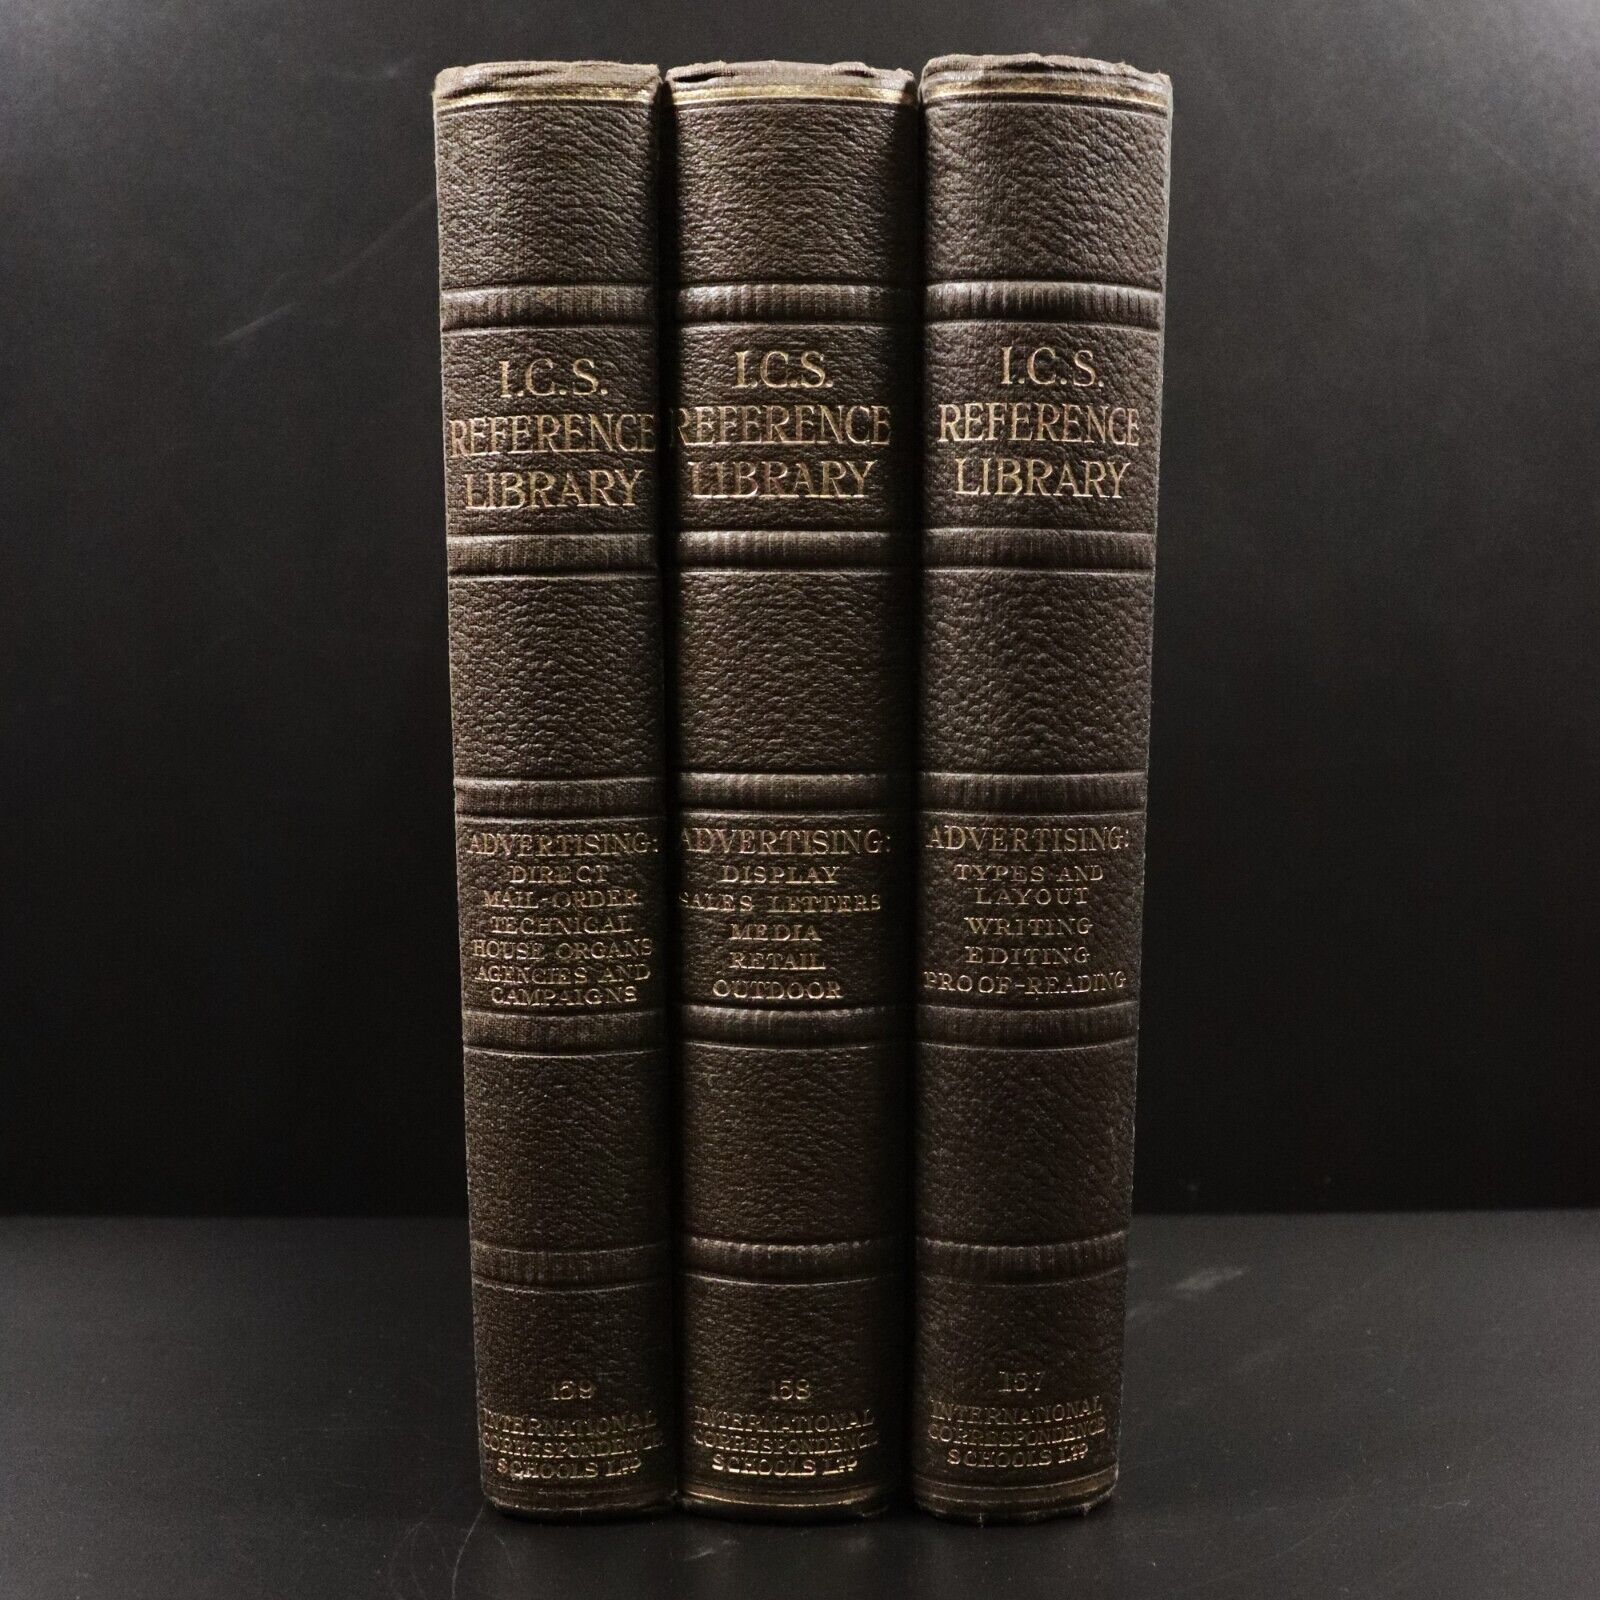 c1930 3vol I.C.S. Reference Library: Advertising - Antique Marketing Book Set